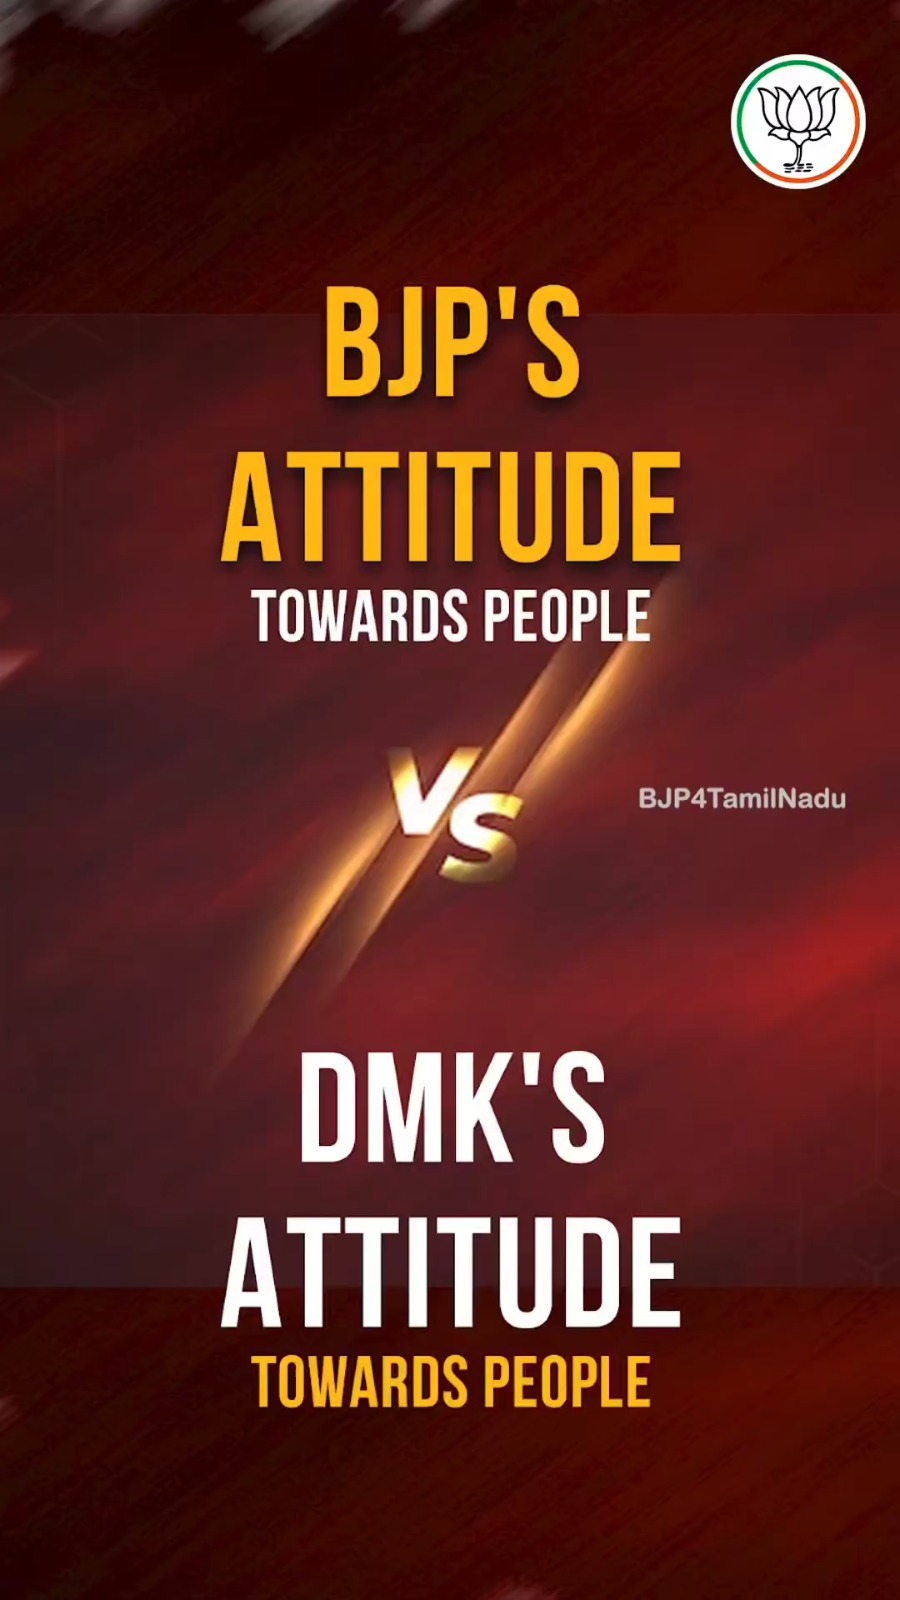 BJP is the party that respects people…! DMK is the party that attacks people..!